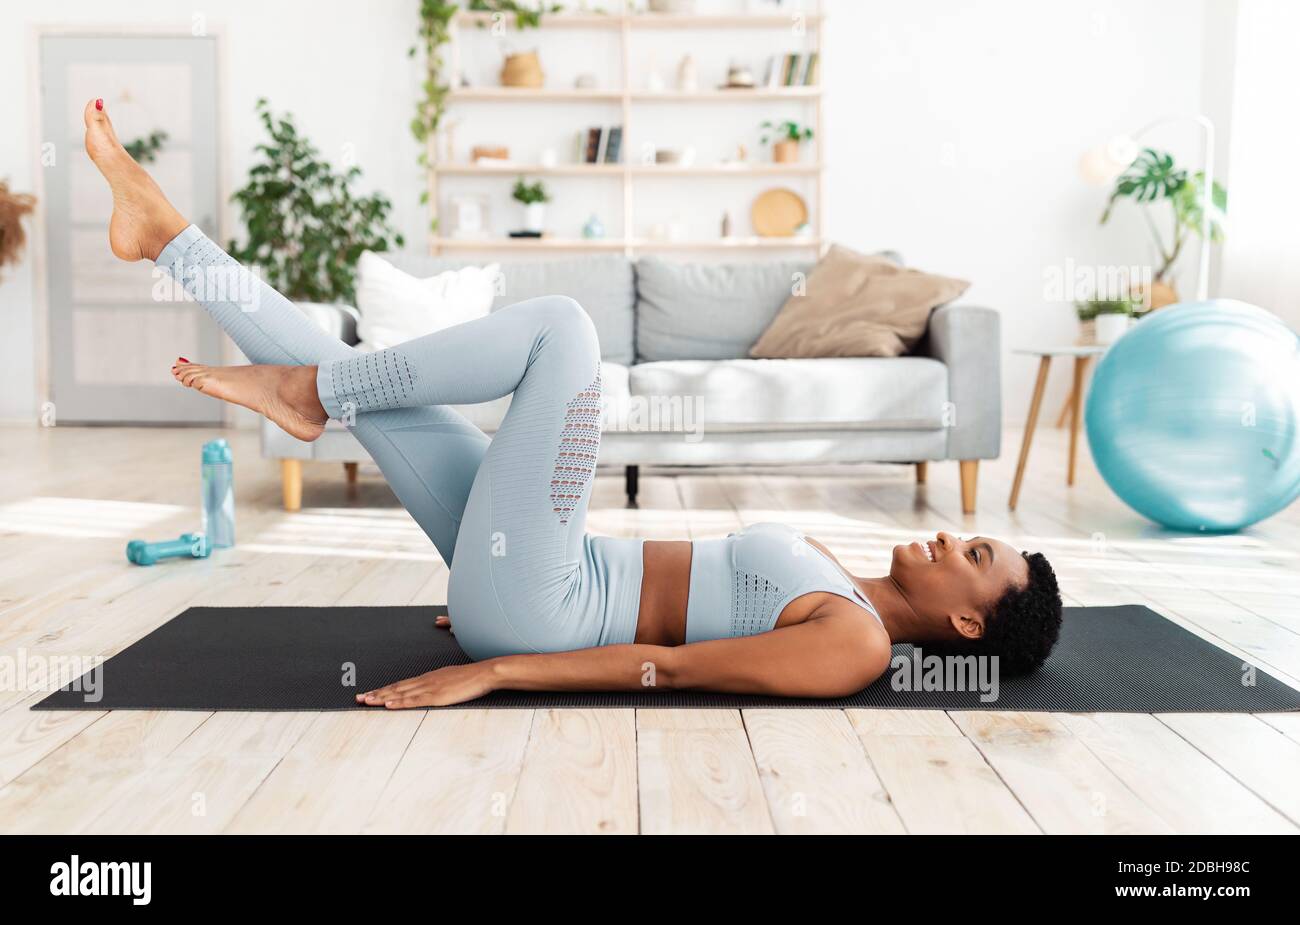 Sports training at home. Attractive young woman lying on yoga mat and cycing in air, doing abs exercise in living room Stock Photo